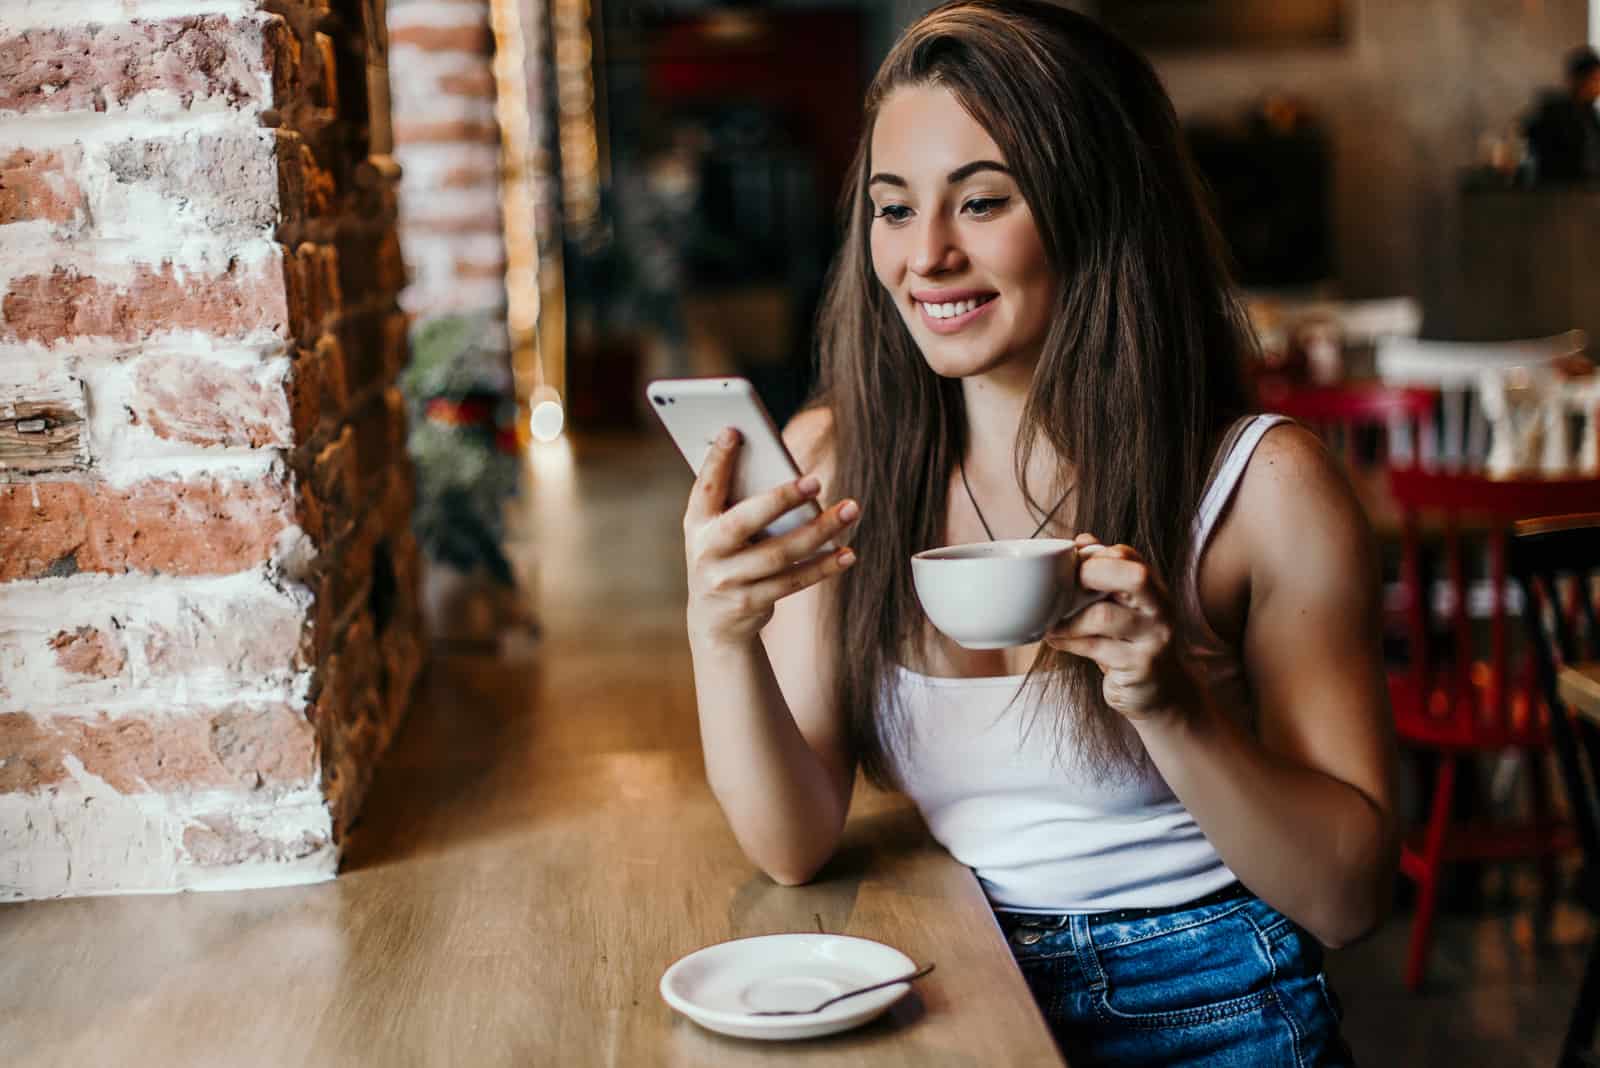 a beautiful young woman with long brown hair drinks coffee and keys on the phone